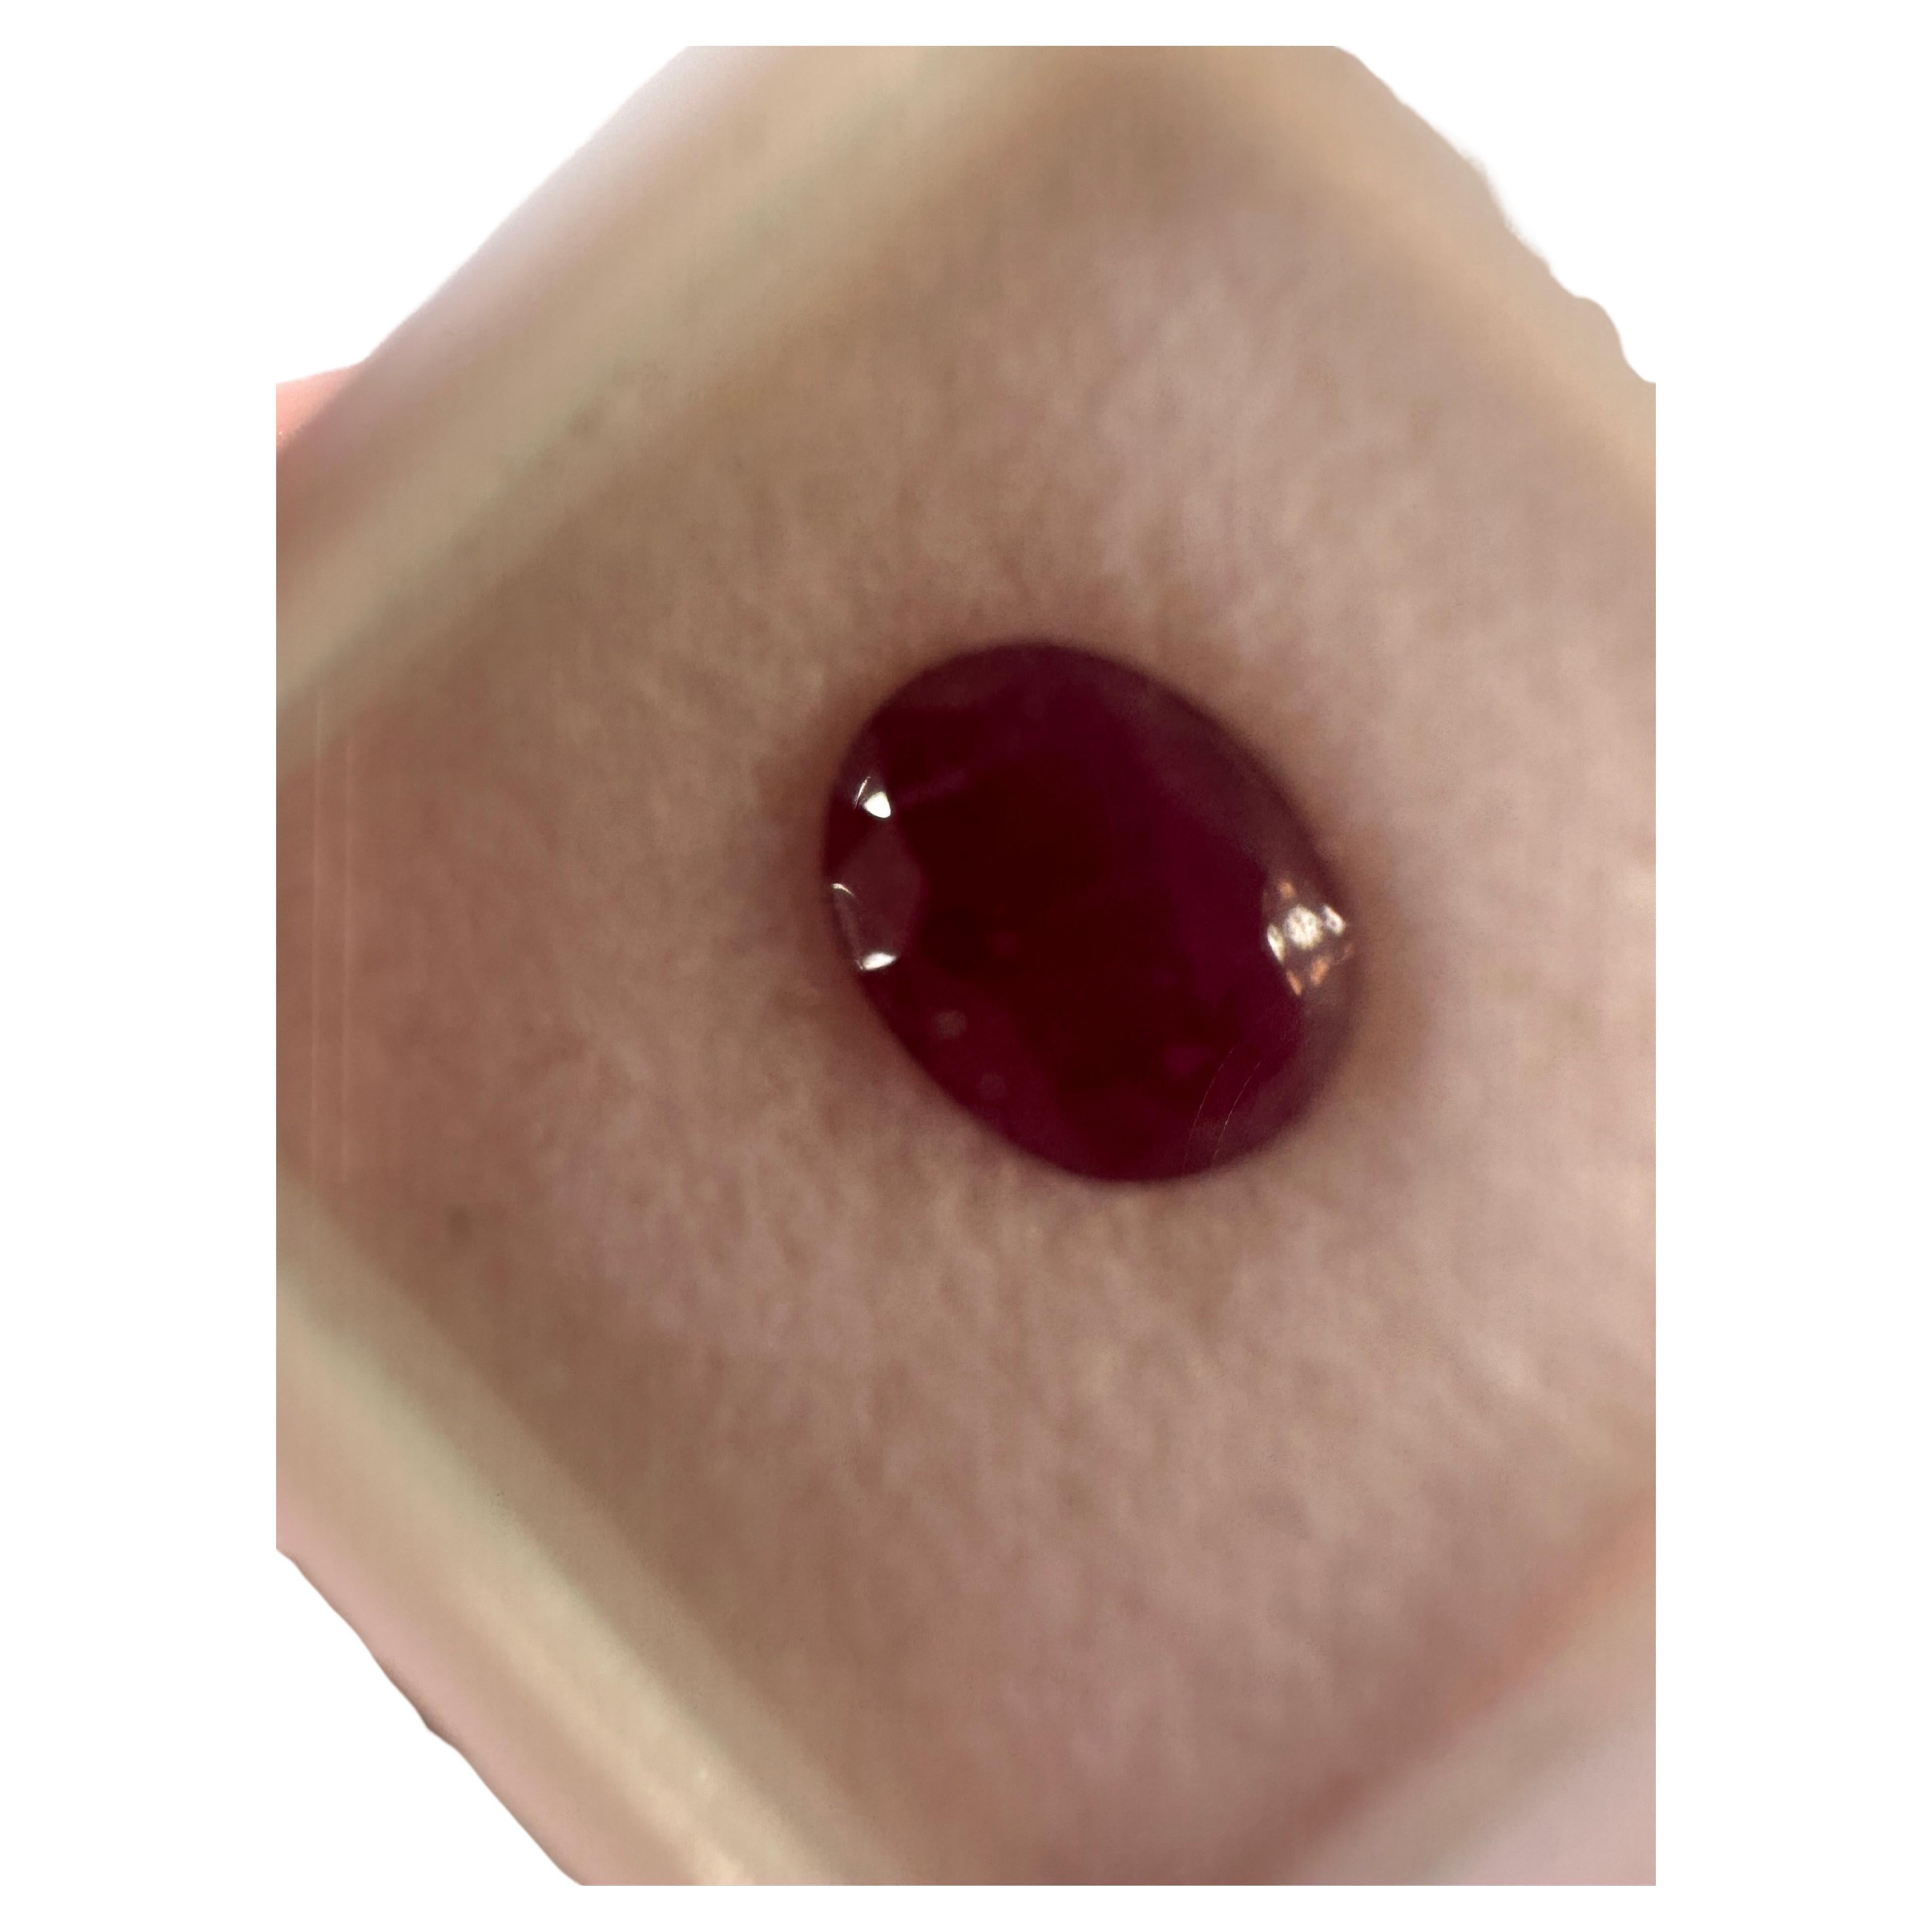 Rare untreated ruby, heat only, stunning color!

NATURAL GEMSTONE(S): NATURAL RUBY 
Clarity/Color: Slightly Included/Pinkish Red
Cut: Rectangular 9X6.5MM
Treatment: none
pof


WHAT YOU GET AT STAMPAR JEWELERS:
Stampar Jewelers, located in the heart